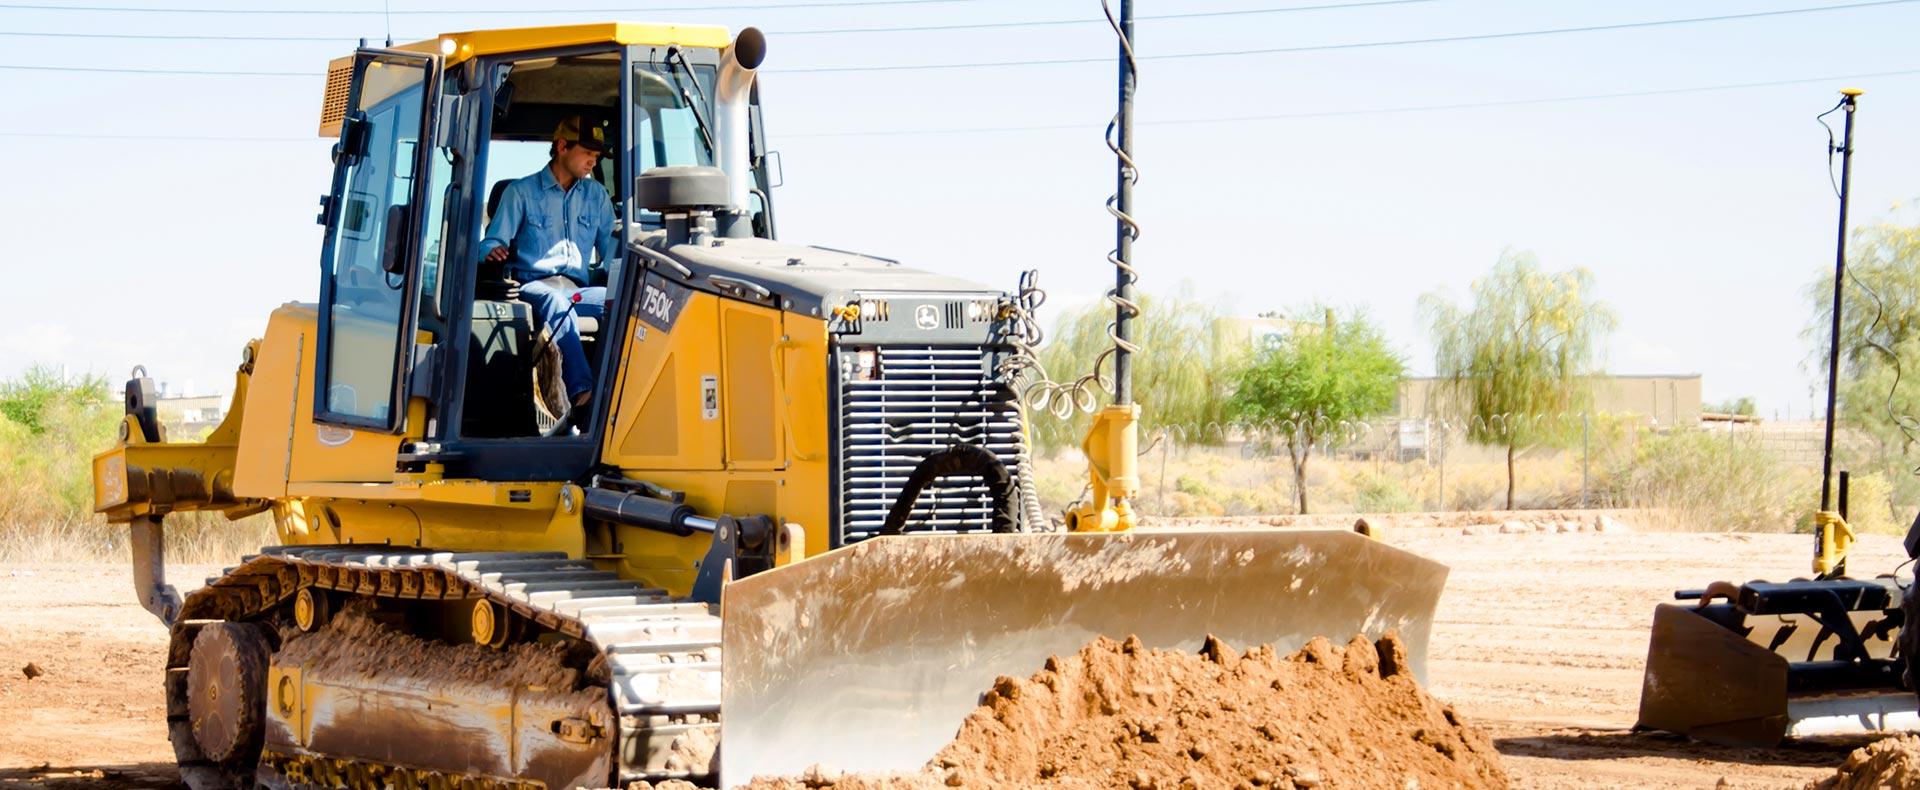 5 Tips for Buying a Used Dozer